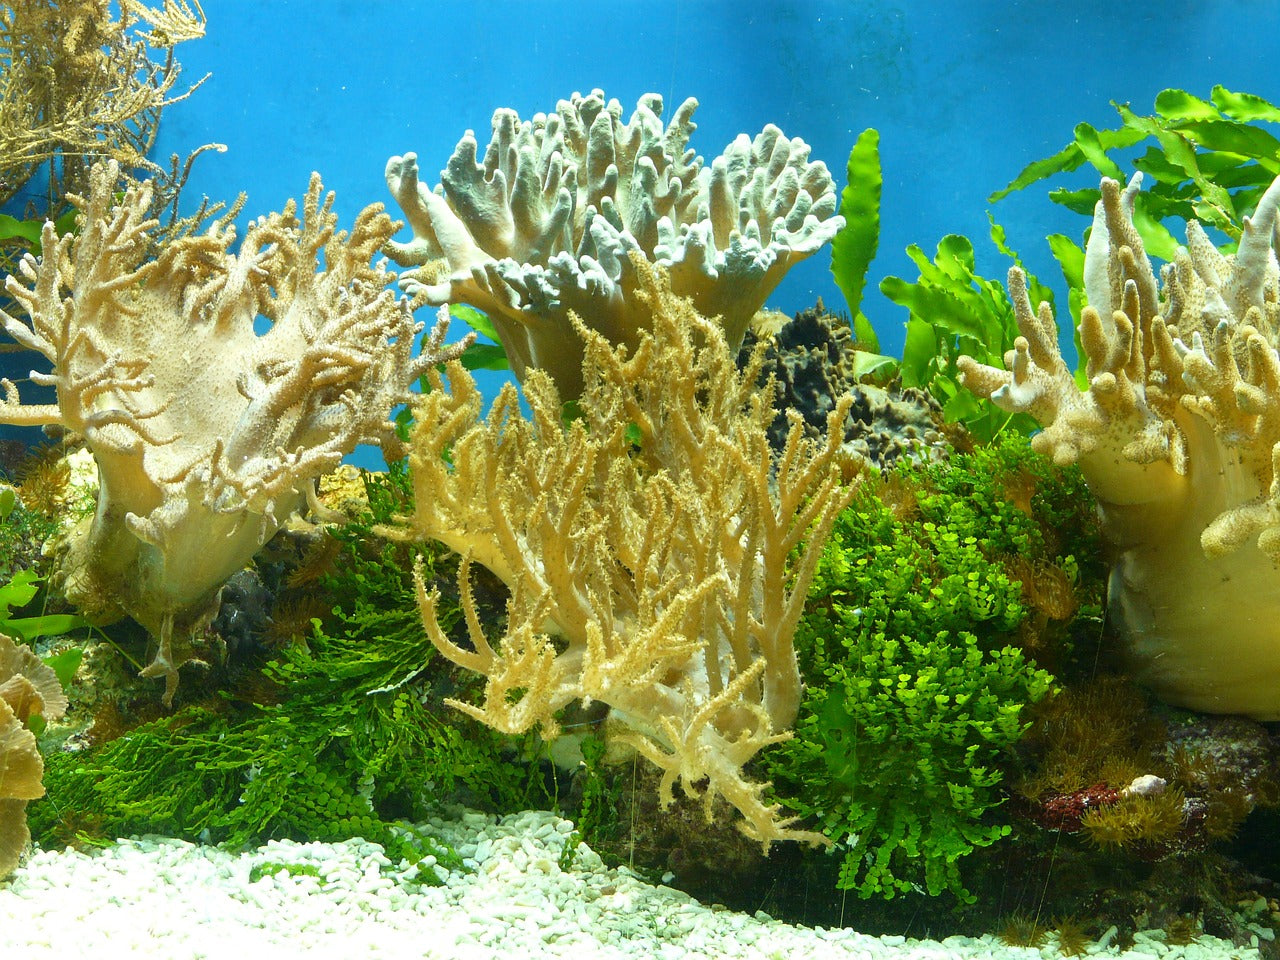 The Art of Aquascaping: Crafting an Underwater Paradise in Your Tropical Aquarium